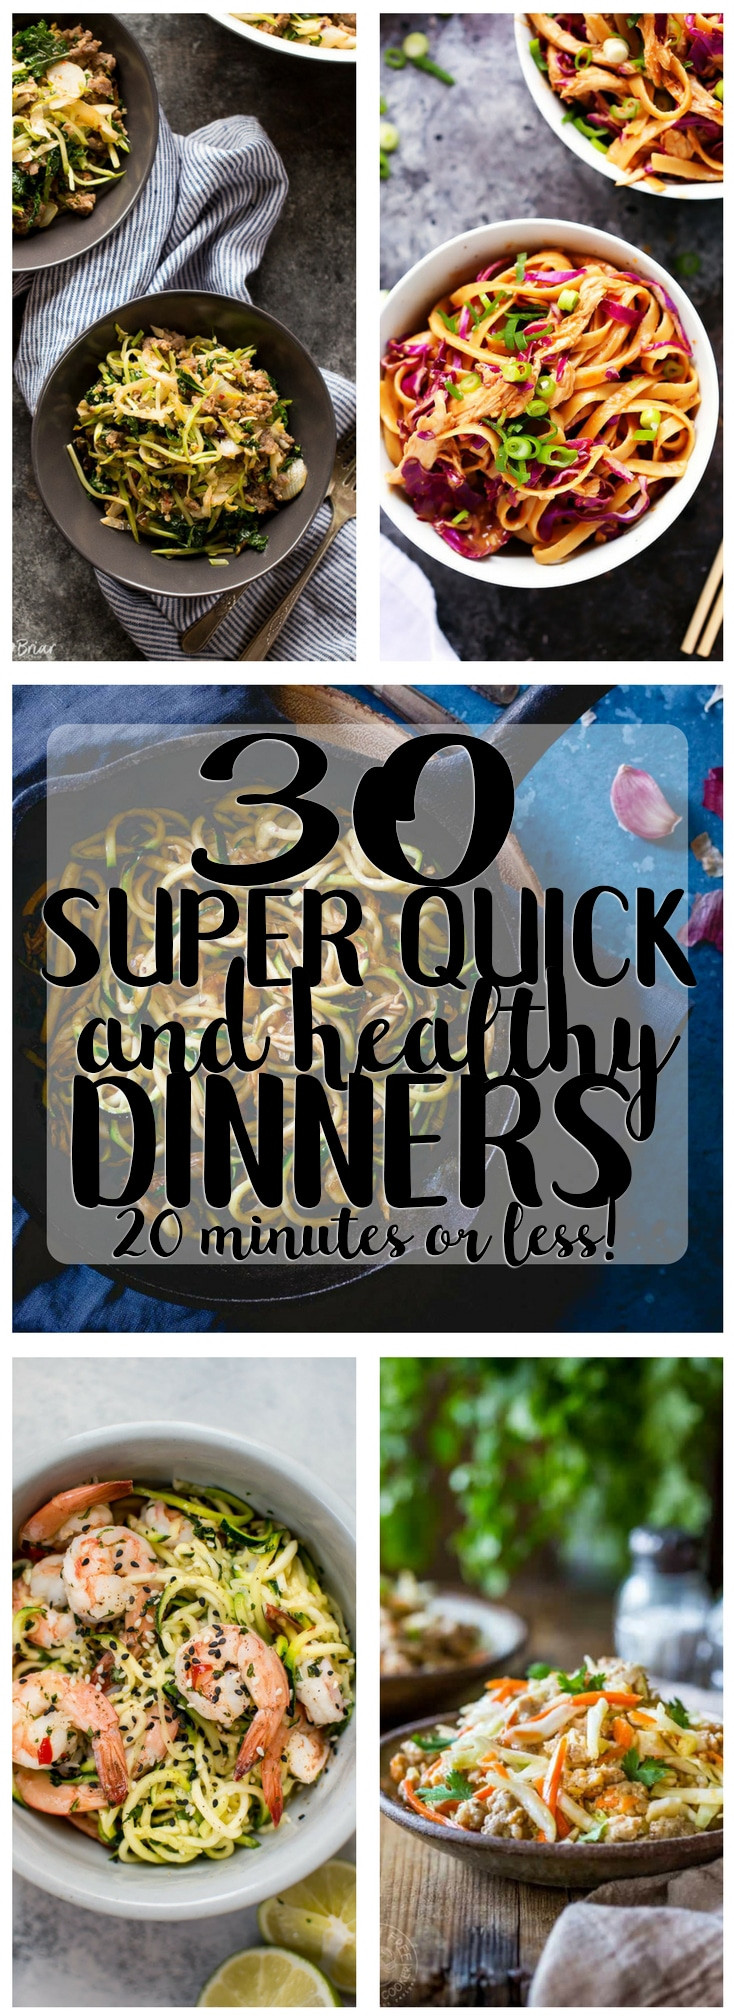 Super Easy Healthy Dinners
 30 Super Quick and Healthy Dinner Recipes 20 Minutes or